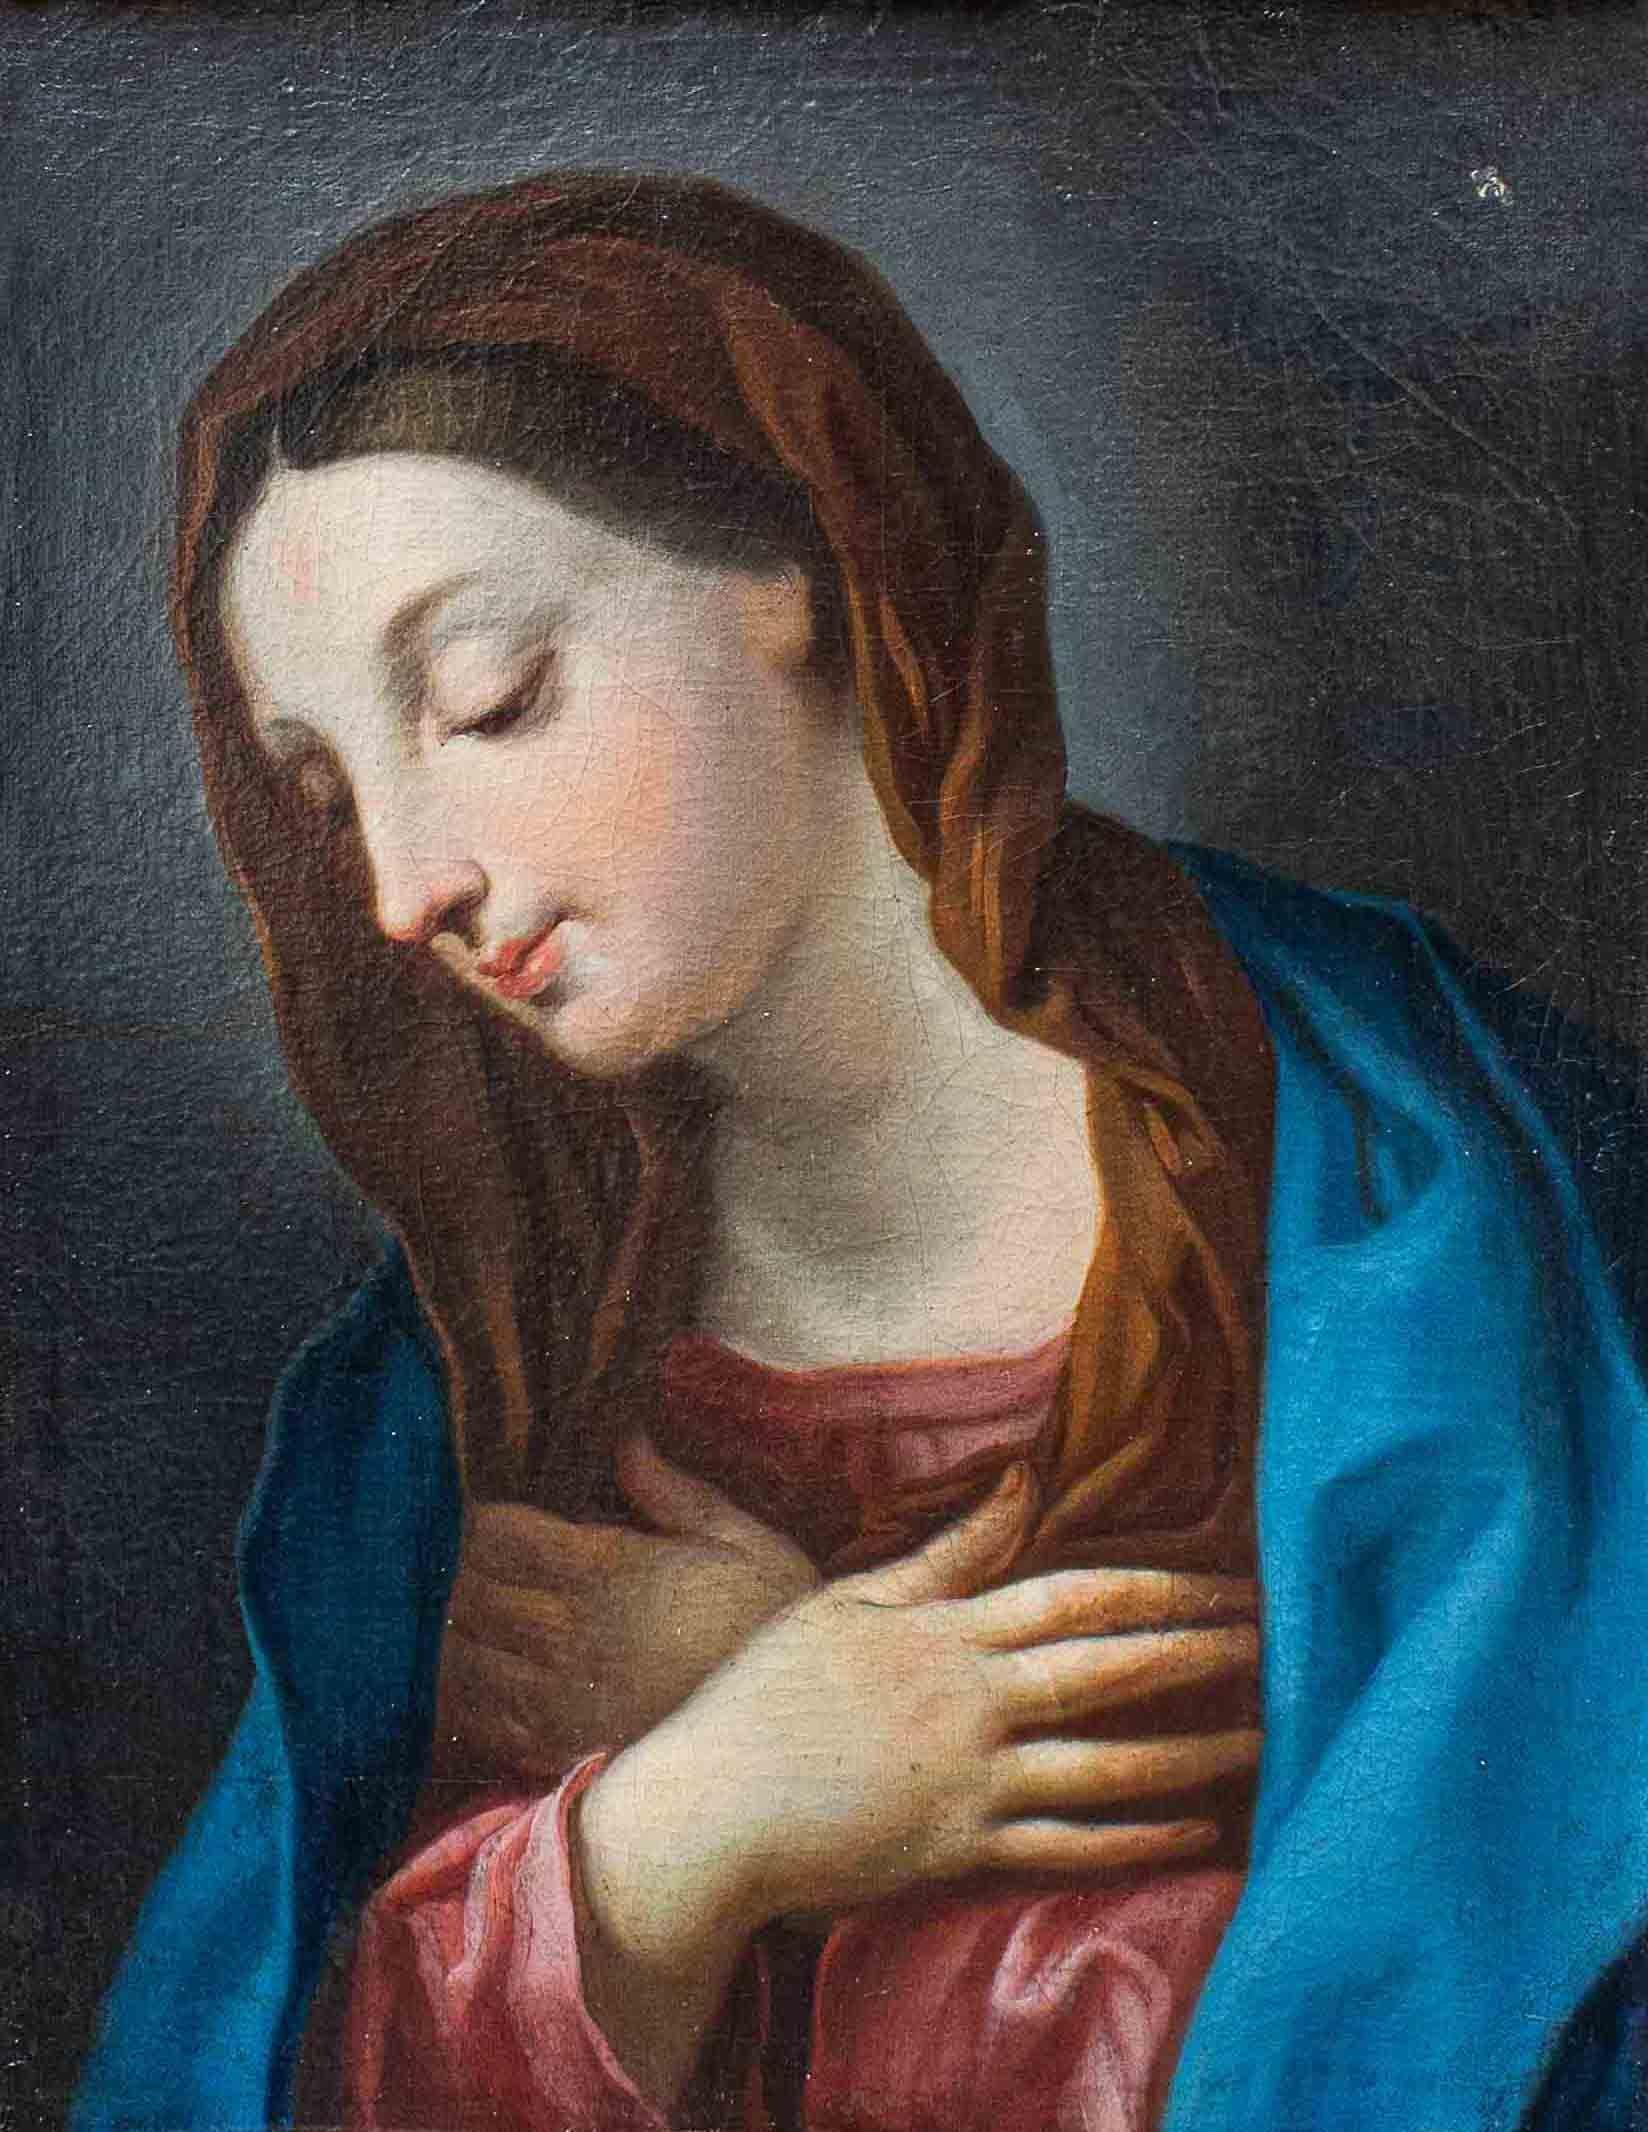 Emilian school, 18th century.
Praying Virgin.
Oil on canvas, 46 x 37 cm - with frame 69 x 53 cm.

The affected compositional and figural purism allows us to bring the present back to the context of the Emilian school that flourished in the wake